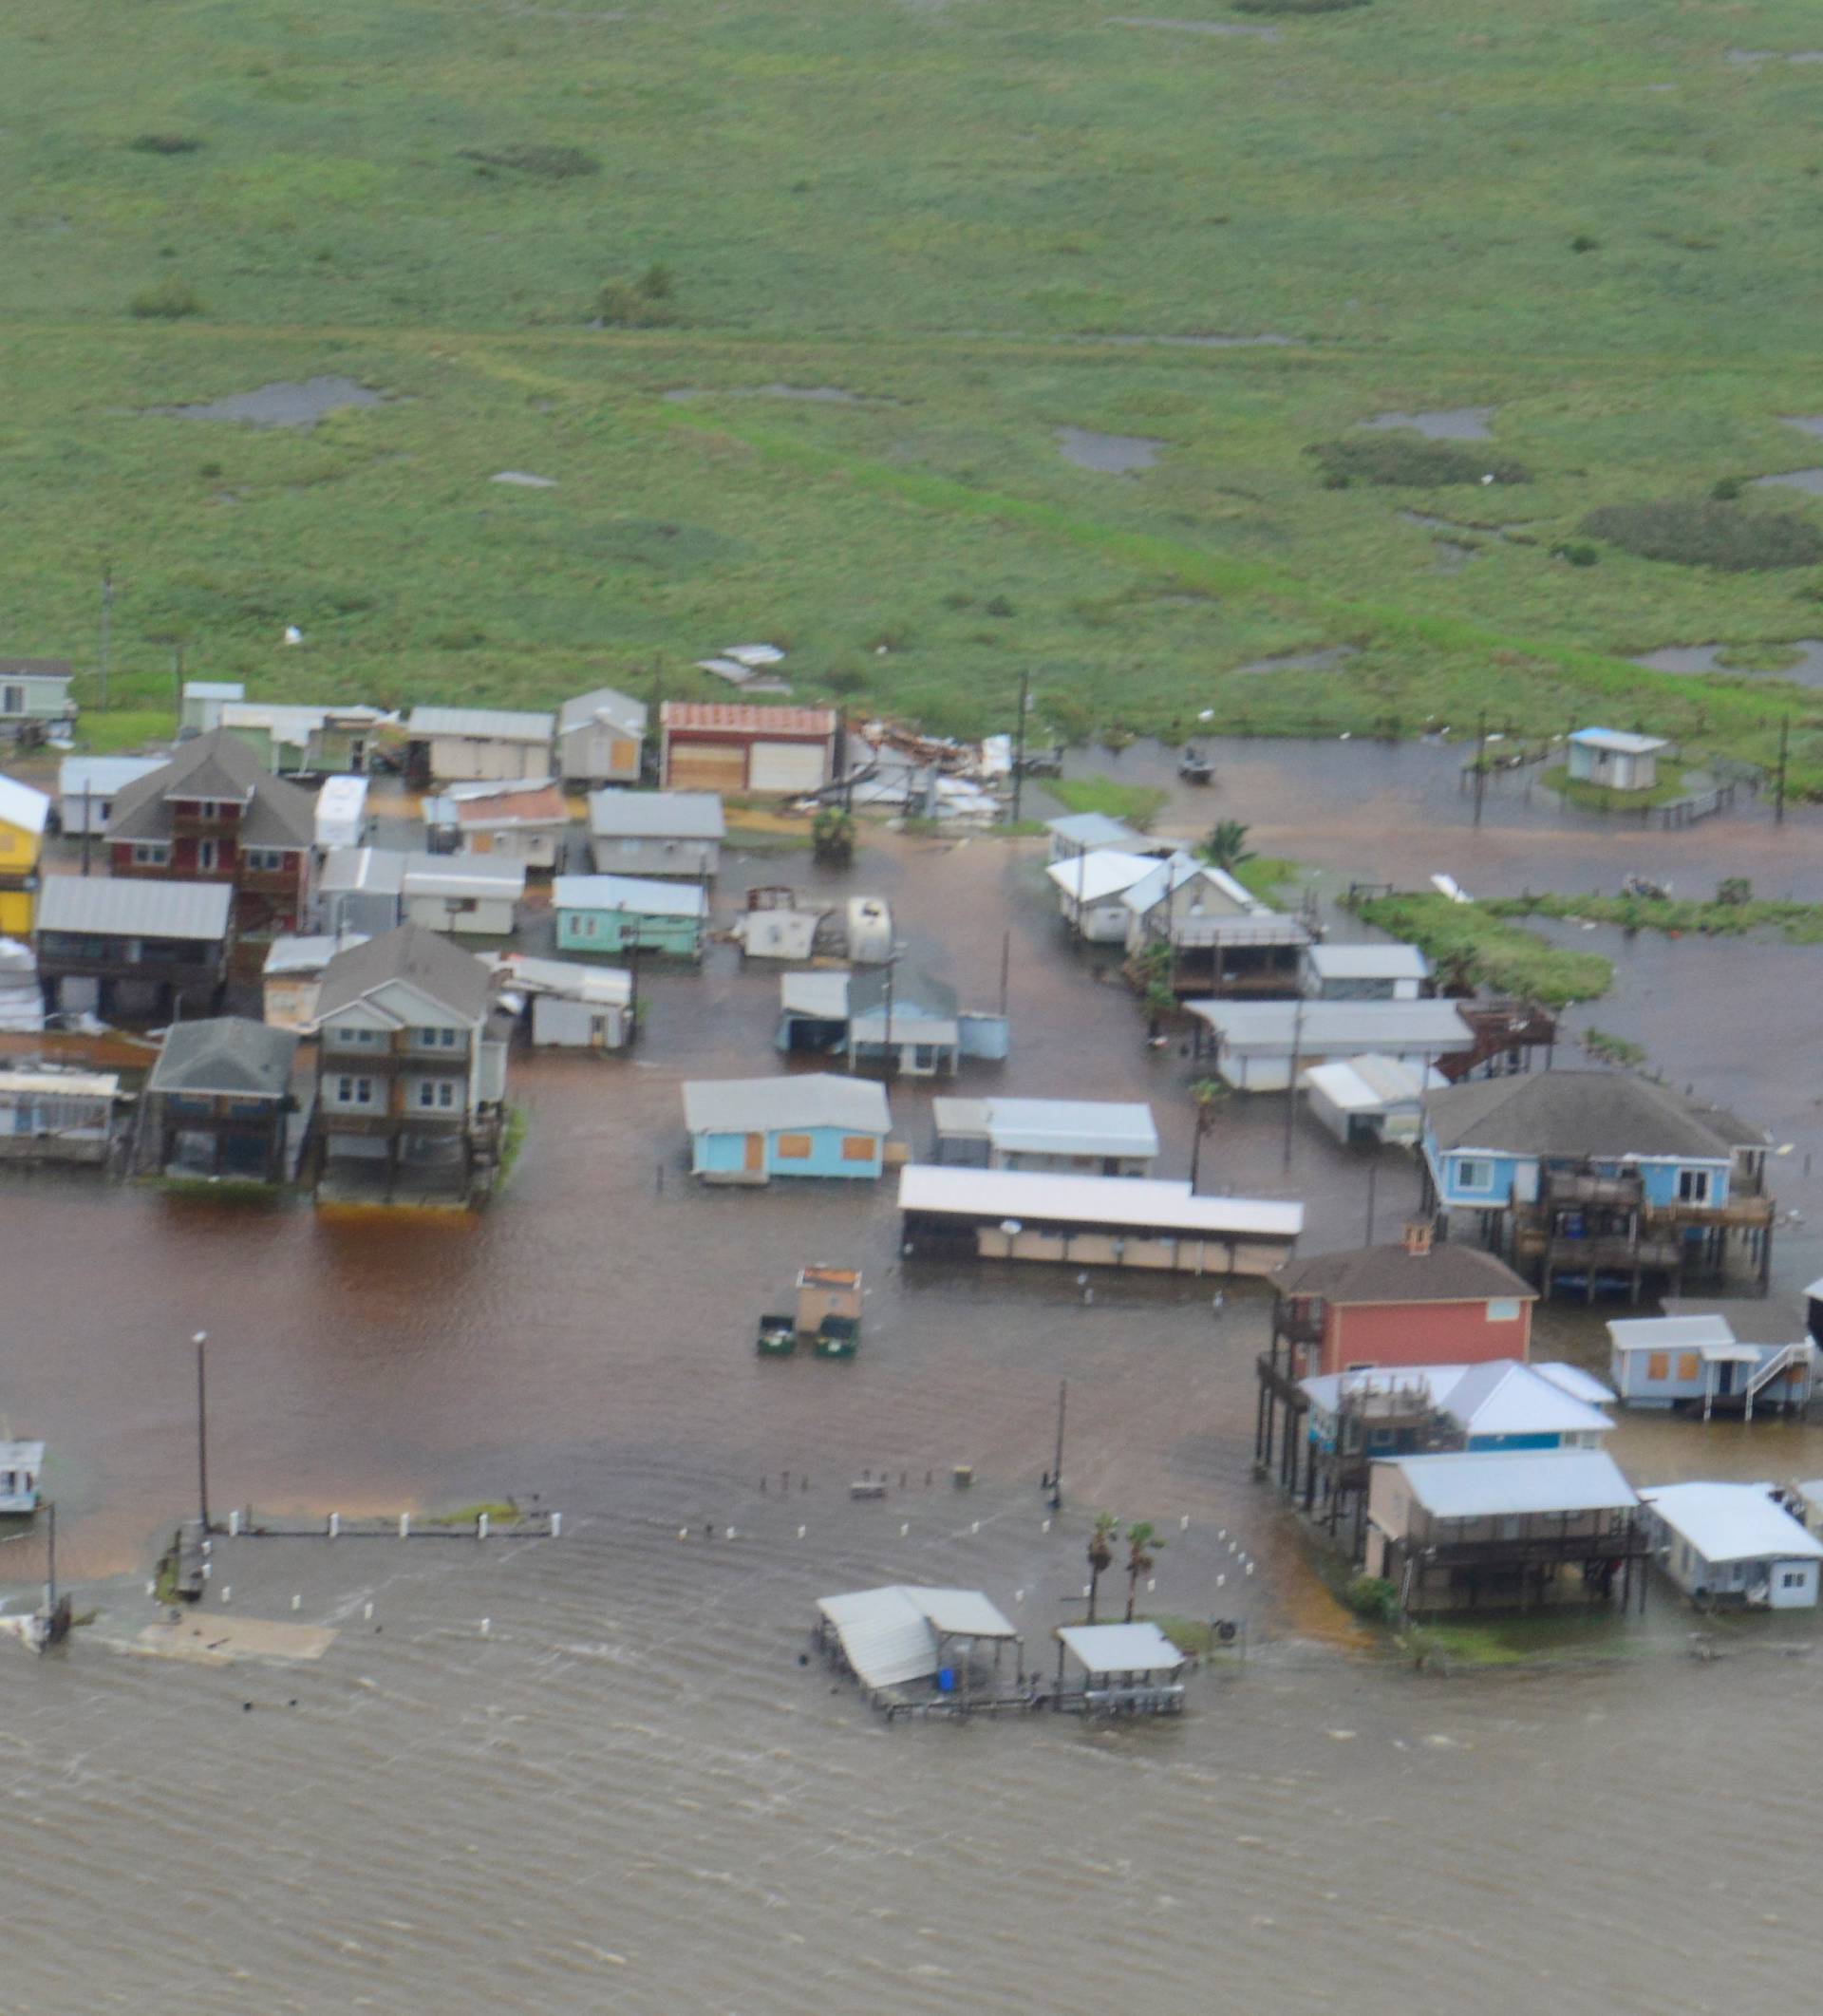 Housing surrounded by flood waters is seen from a U.S. Coast Guard helicopter during an overflight from Port Aransas to Port O'Connor